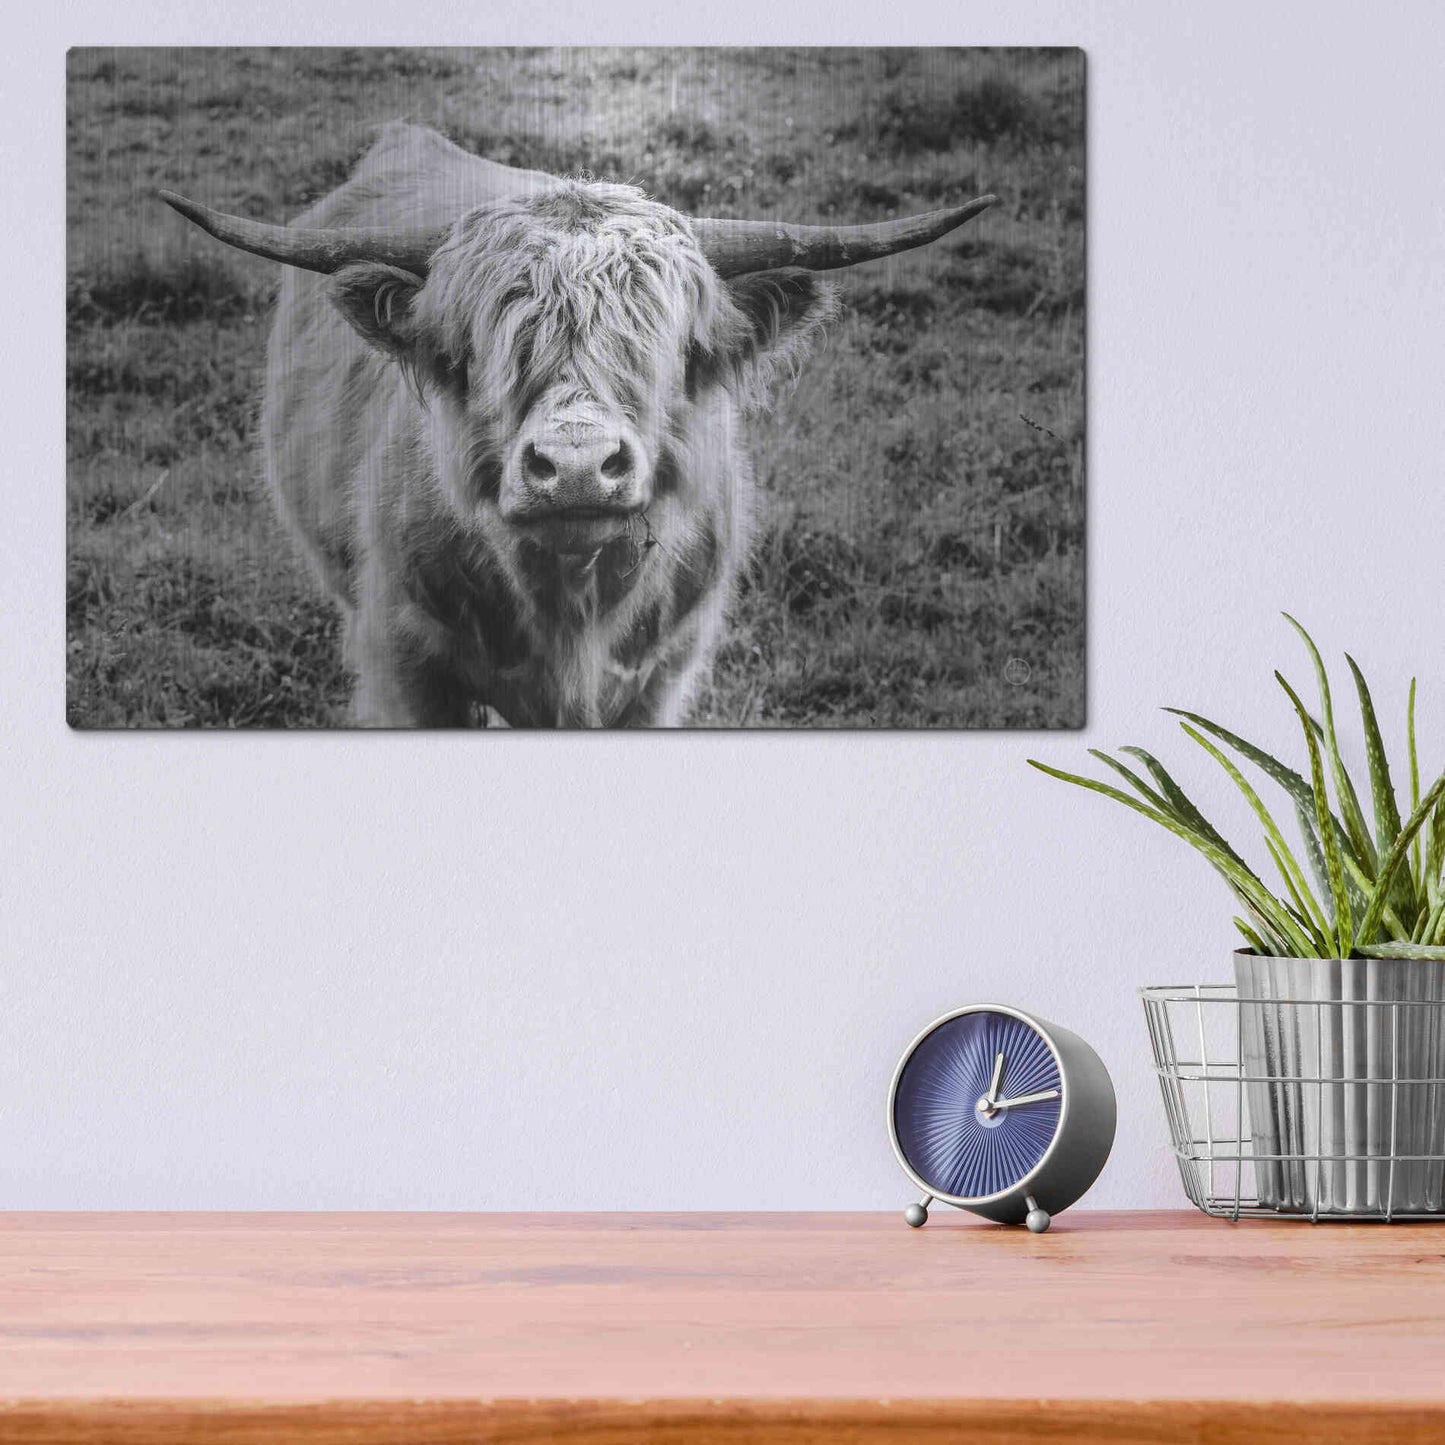 Luxe Metal Art 'Highland Cow Staring Contest' by Nathan Larson, Metal Wall Art,16x12